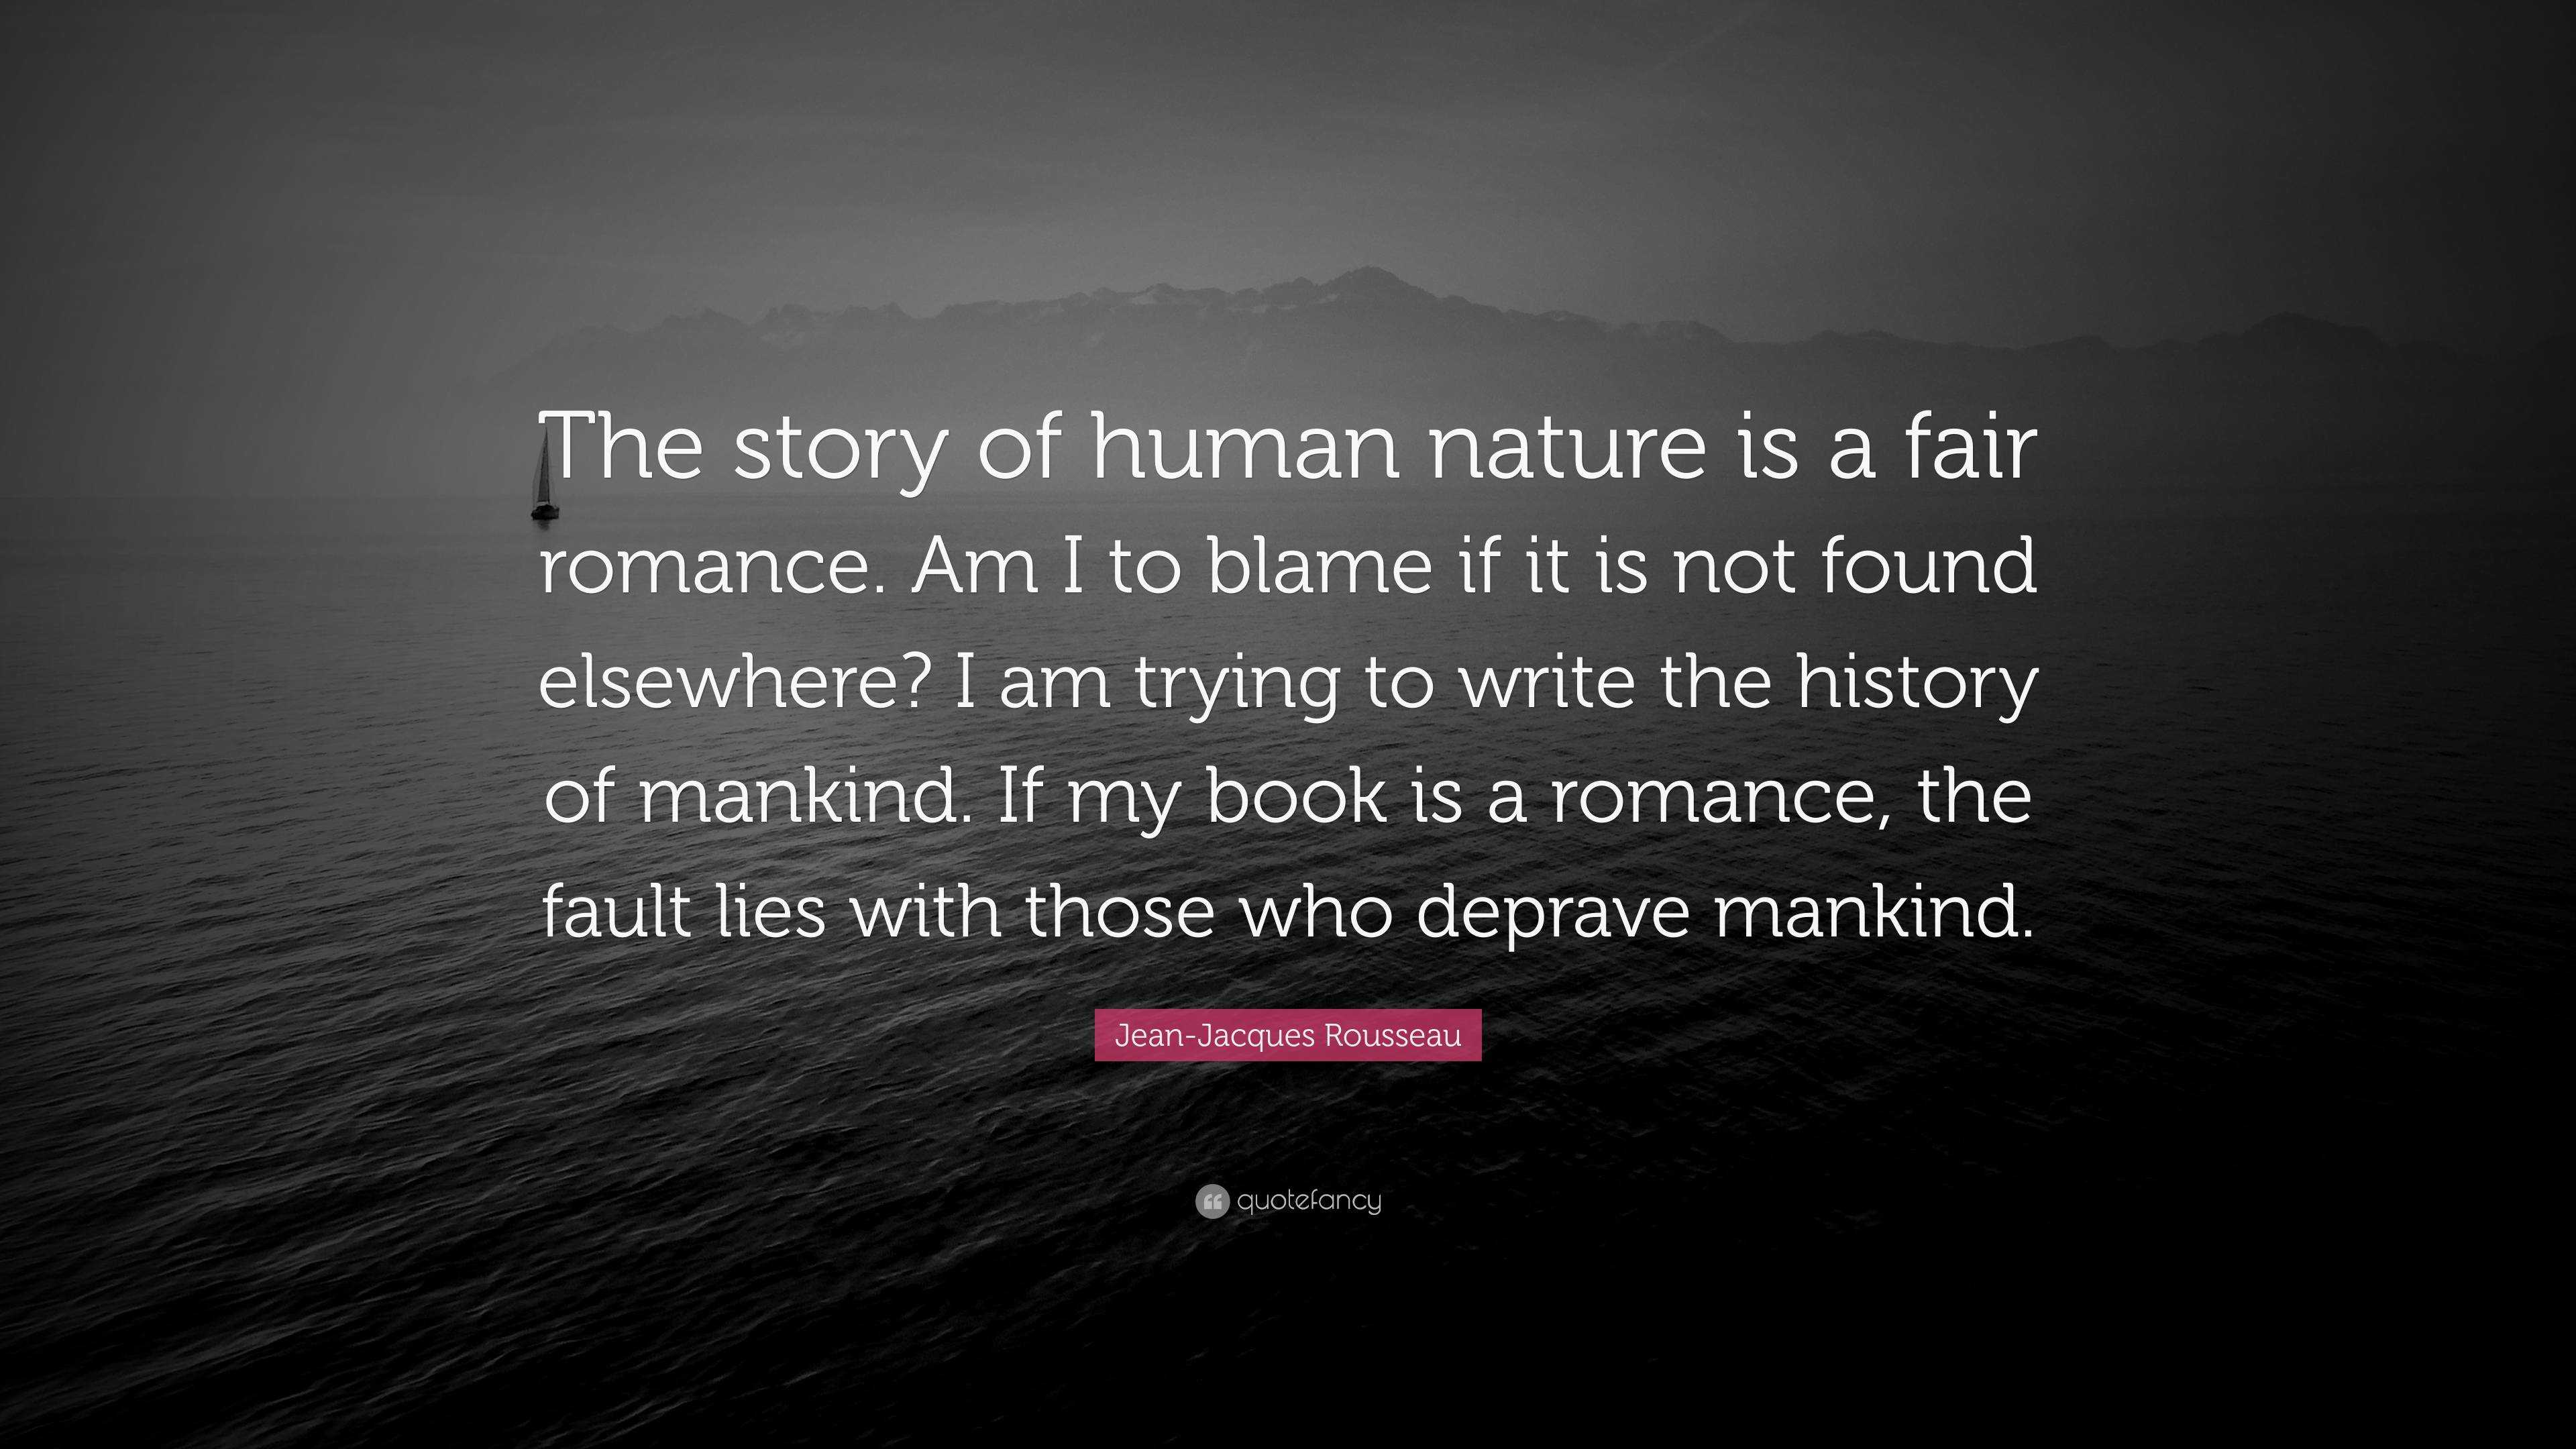 Jean-Jacques Quote: “The story of nature is a fair romance. Am I to blame it is not found elsewhere? I am trying to write the histor...”